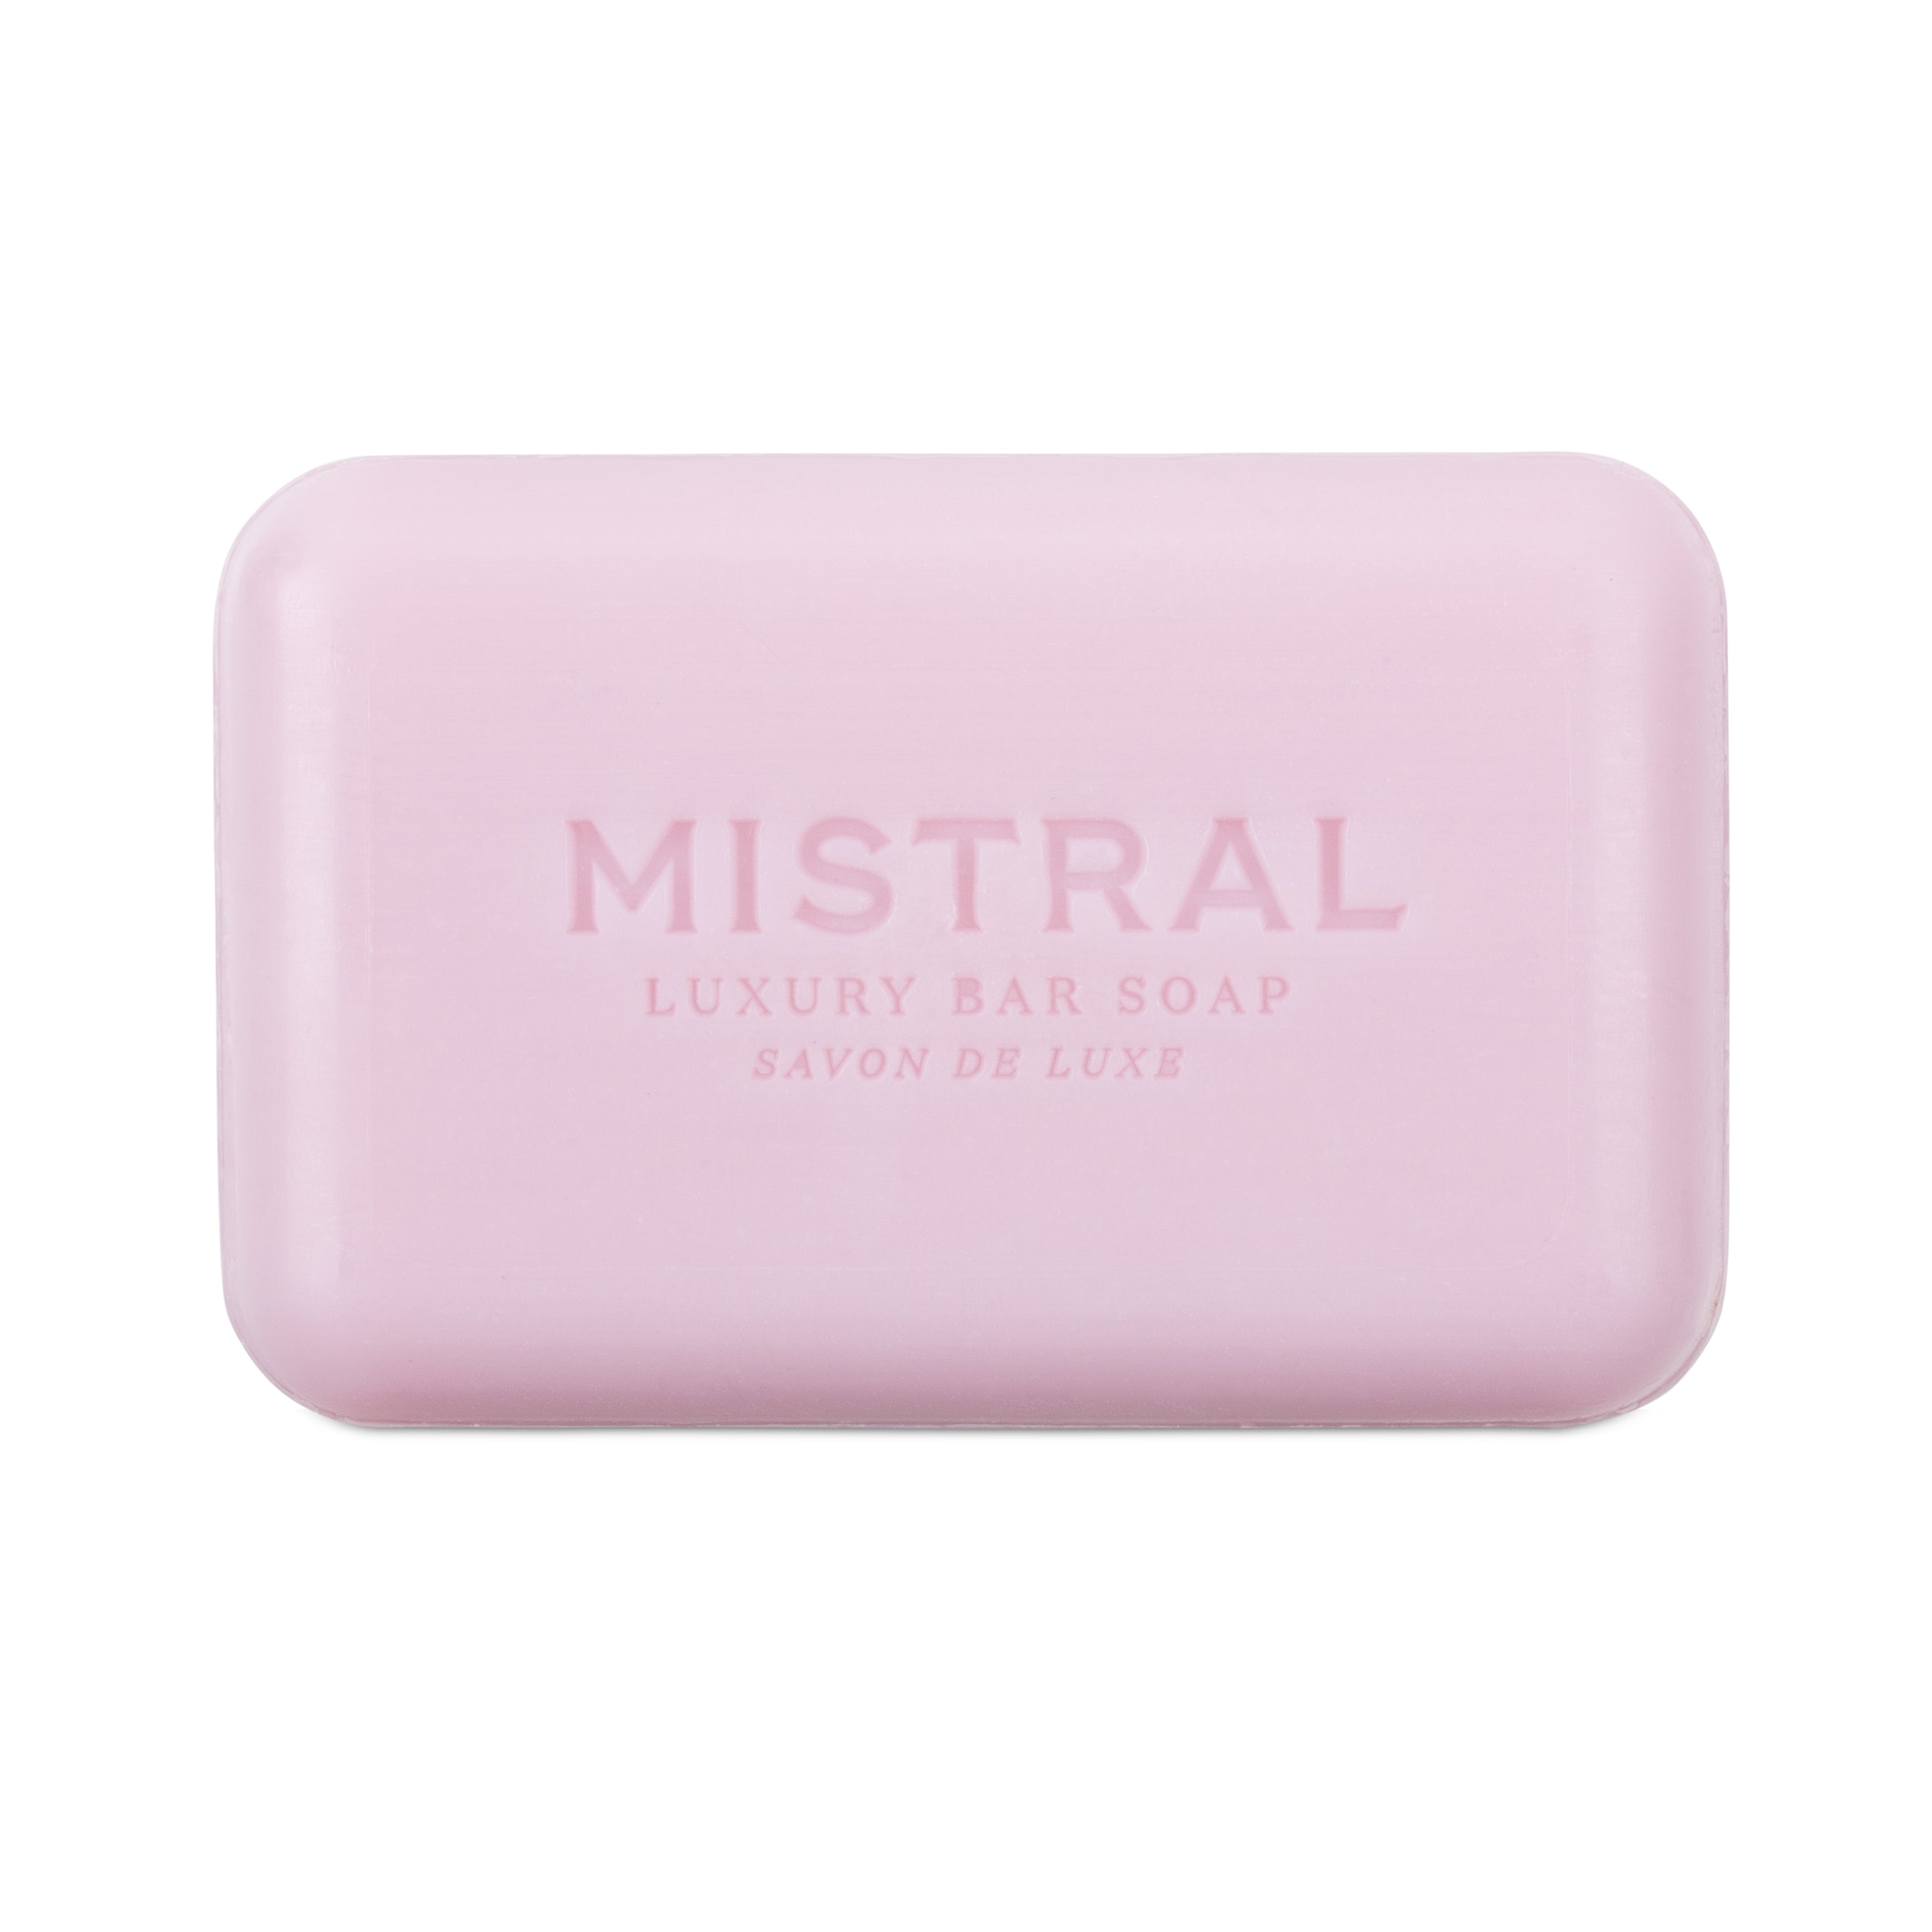 Champagne Peony Classic Bar Soap - mistralsoap